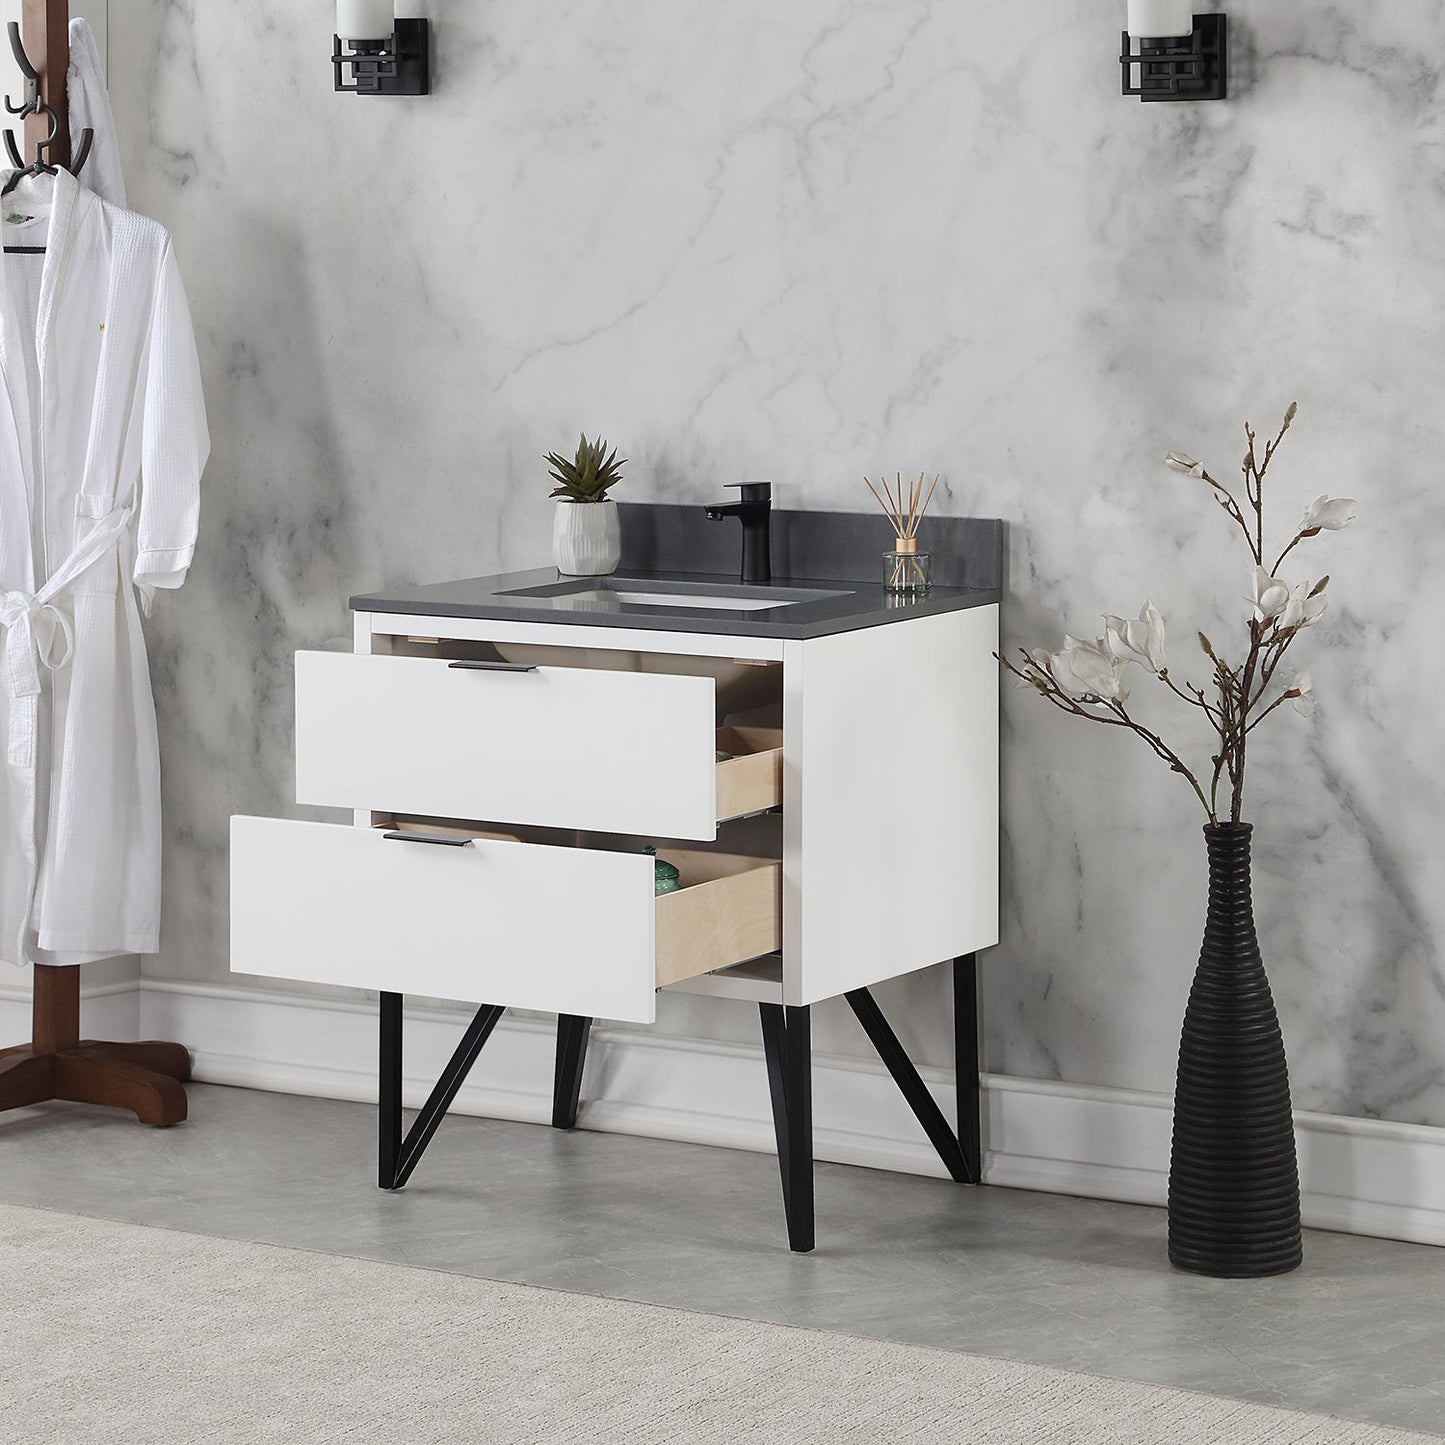 Helios 30" Single Bathroom Vanity in White with Concrete Gray Composite Stone Countertop without Mirror